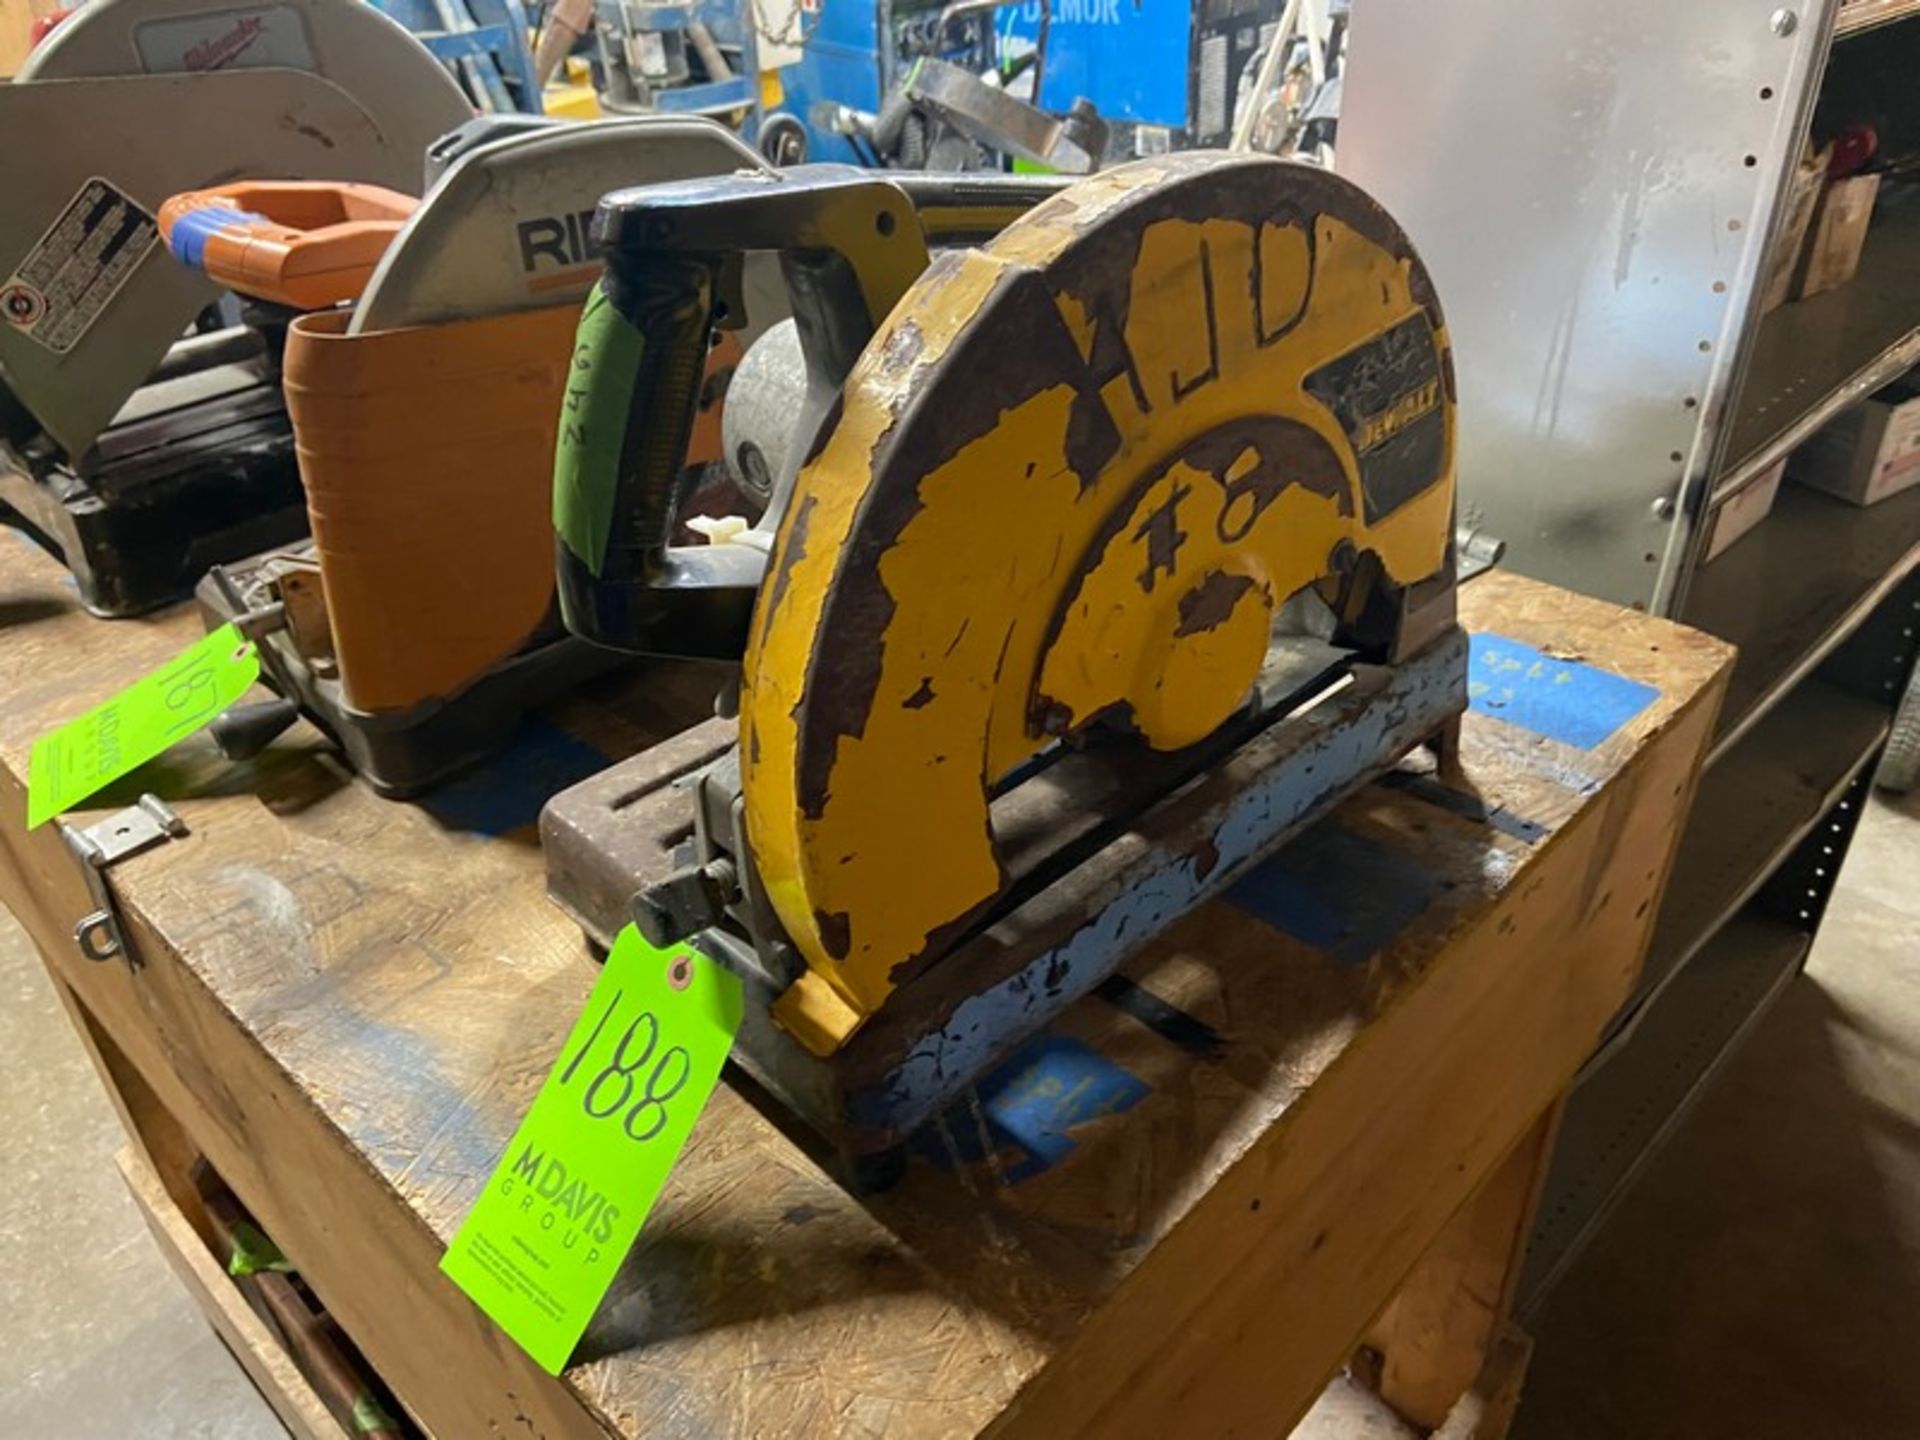 DeWalt 14” Abrasive Chop Saw, S/N 78523, 120 Volts (NOTE: No Blade) (LOCATED IN MONROEVILLE, PA)( - Image 2 of 5